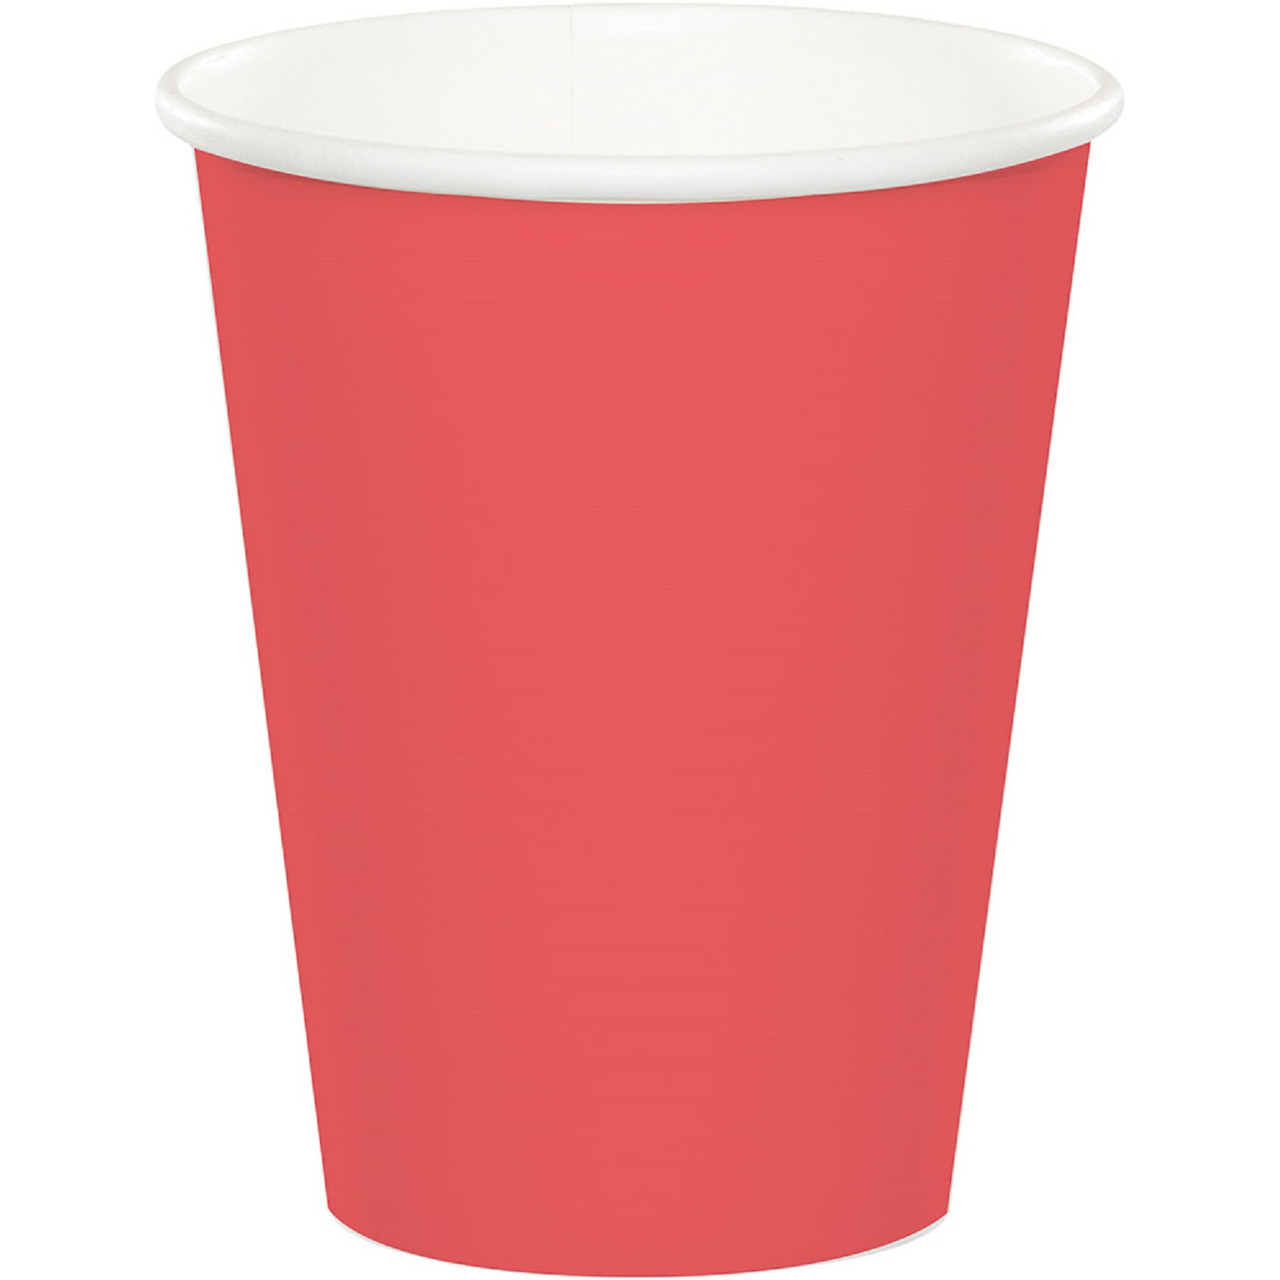 Club Pack of 240 Sunkissed Orange Disposable Drinking Party Cups